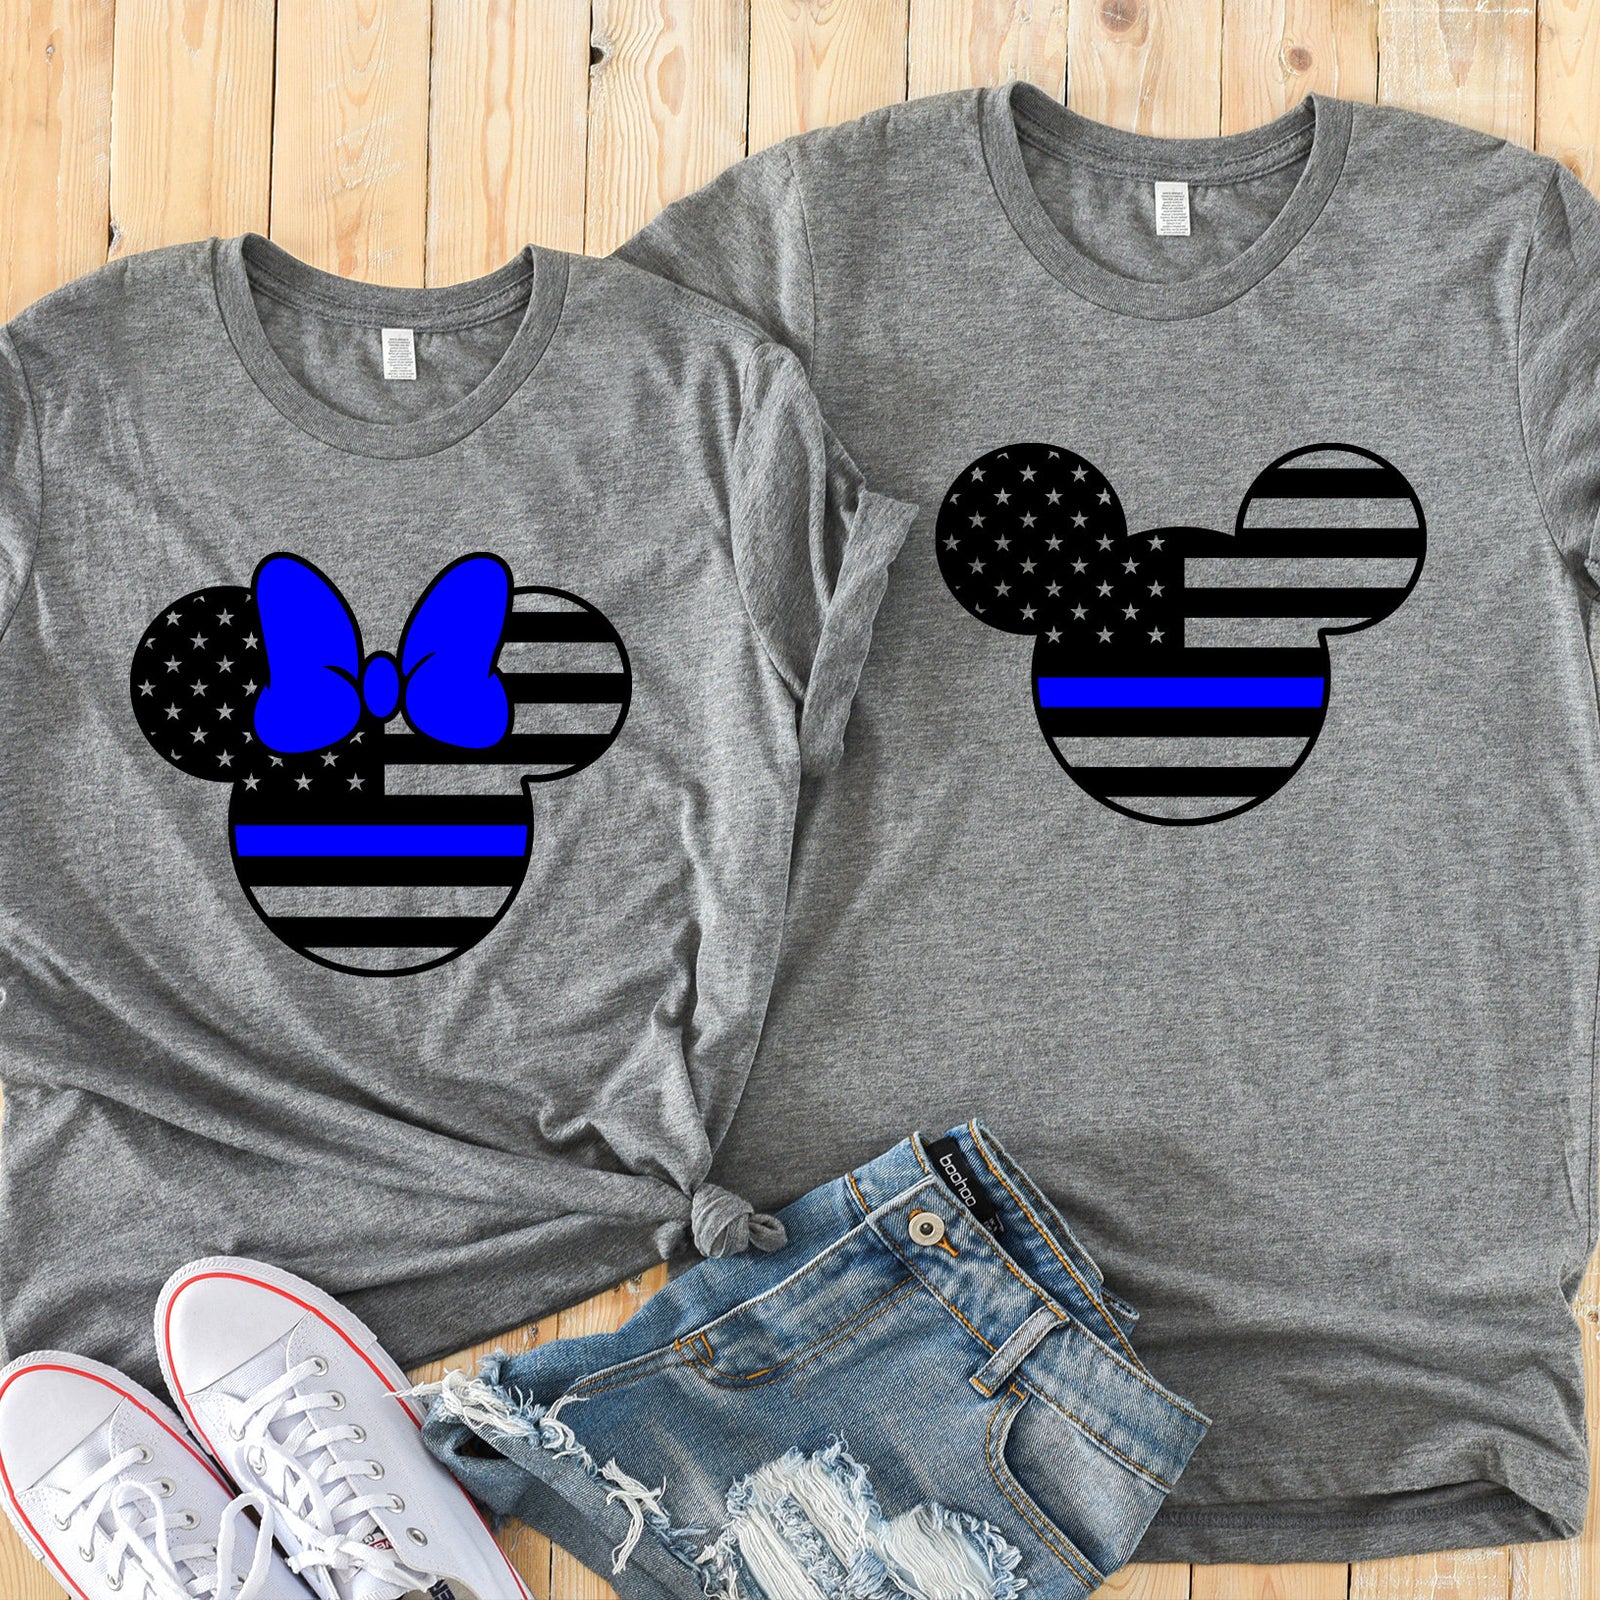 Police Mickey and Minnie Adult Shirts - Disney Couples Matching Shirt - Blue Line Flag -  Blue Stripe - Disney Police